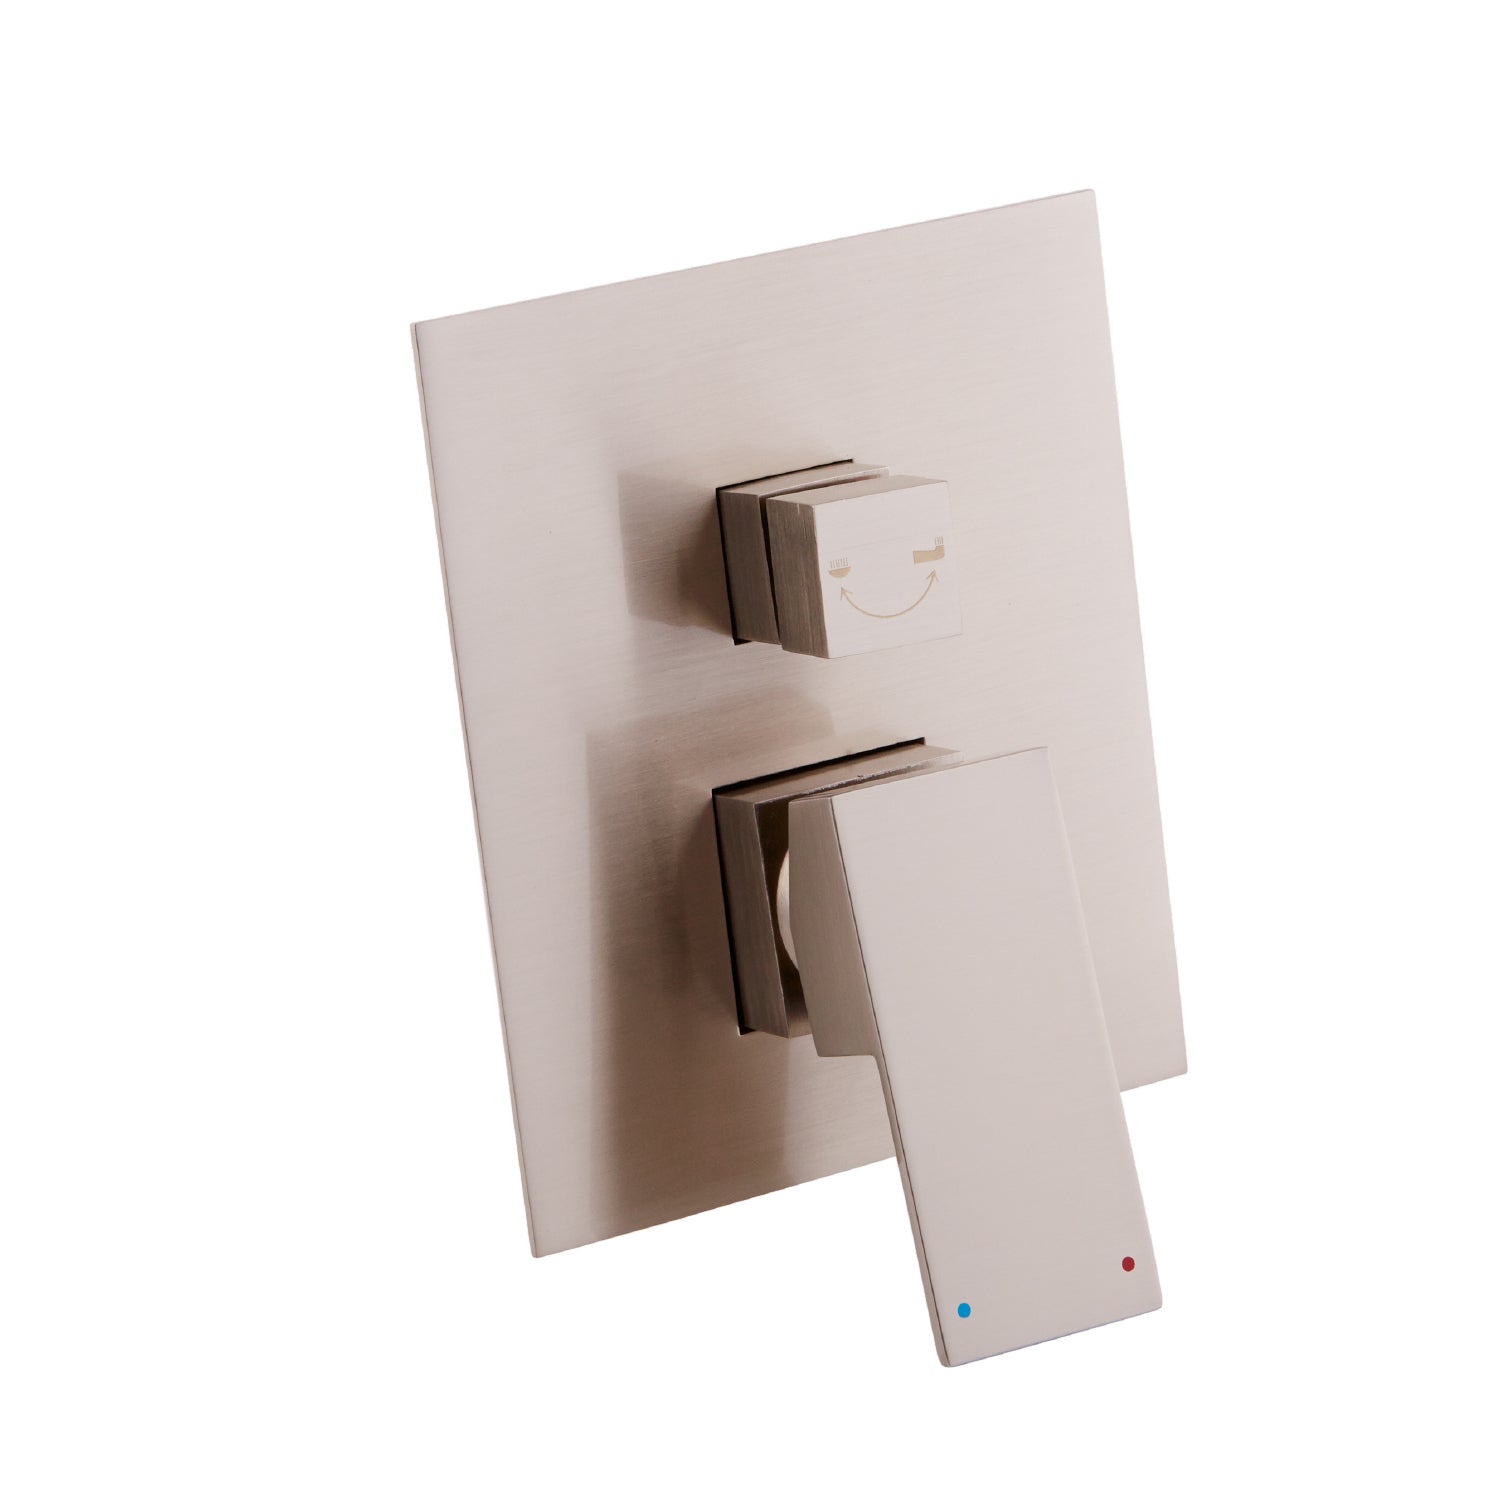 DAX Square Shower Single Valve Trim, Brass Body, Brushed Nickel Finish, 6-5/16 x 7-1/2 x 3-7/8 Inches (DAX-6973A-BN)